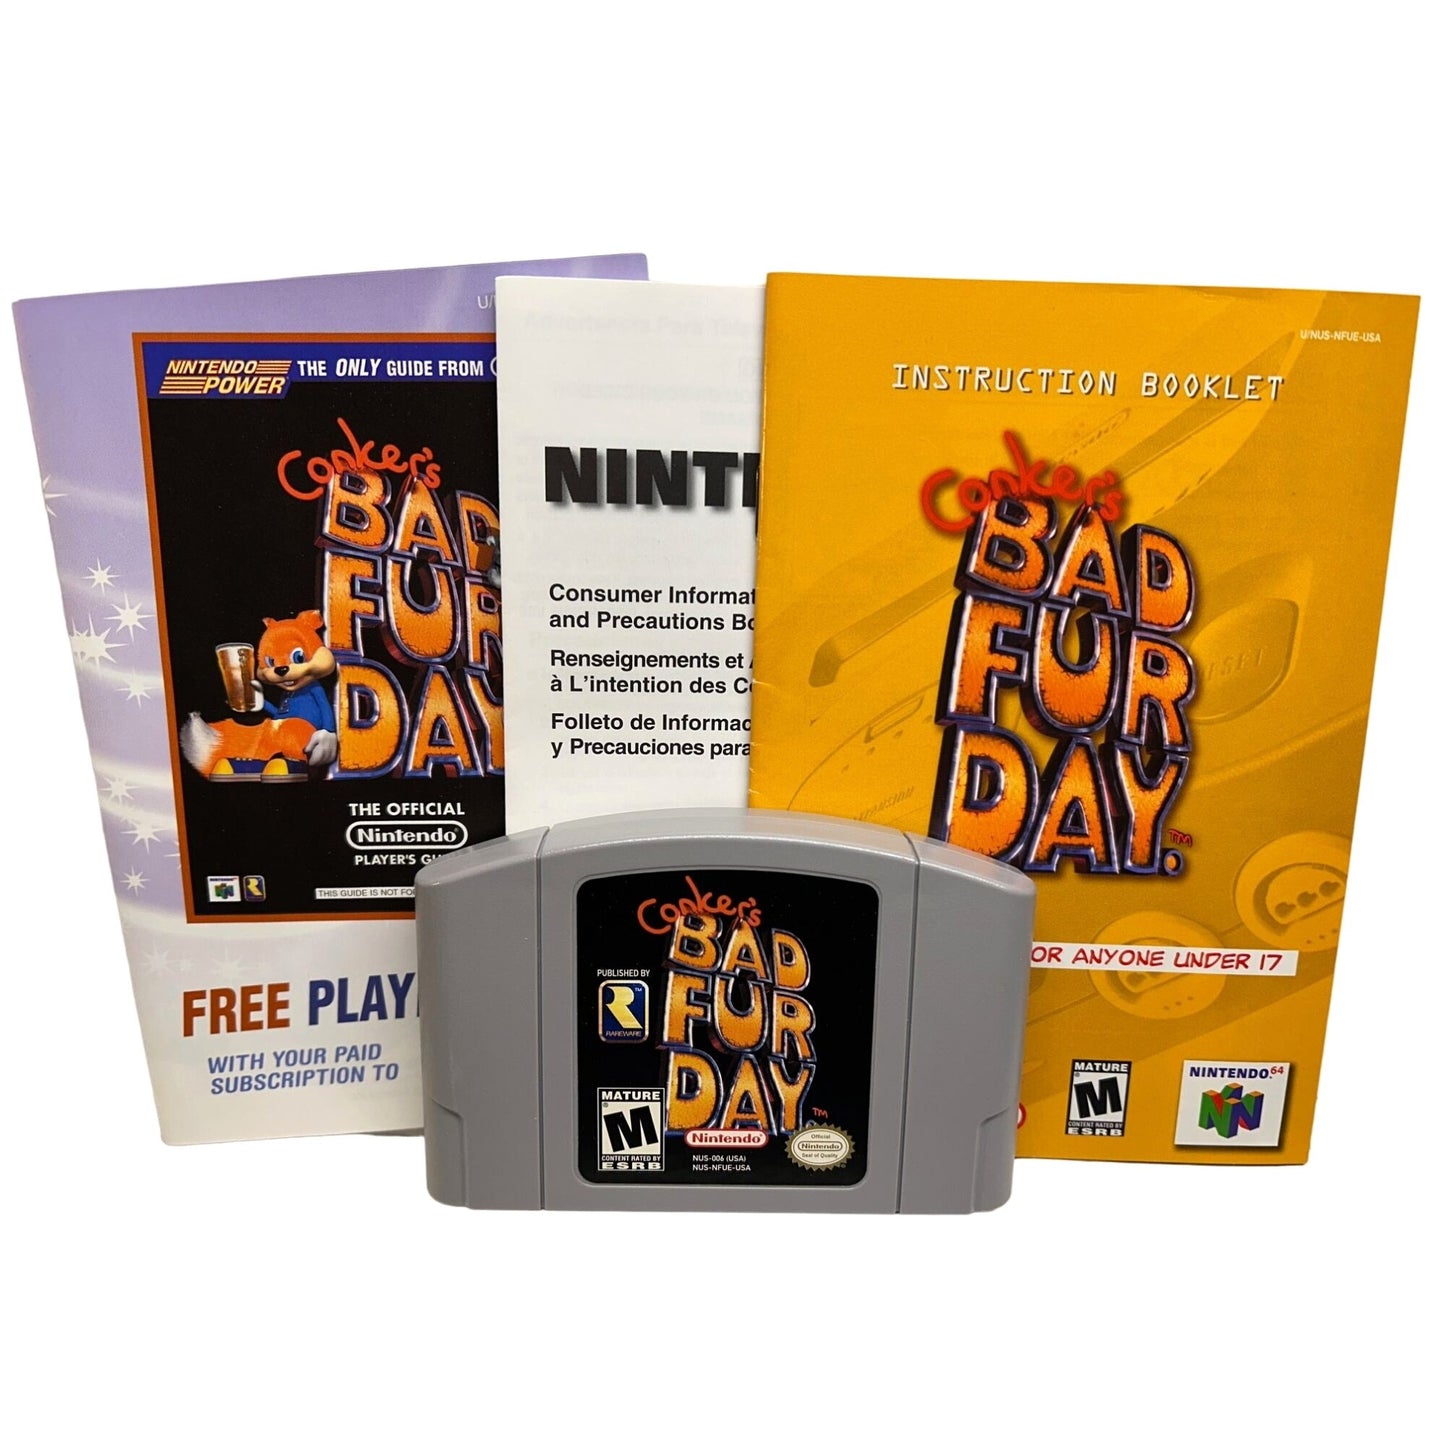 Conker's Bad Fur Day (Nintendo 64) Box Manual Complete CIB N64 TESTED WORKING